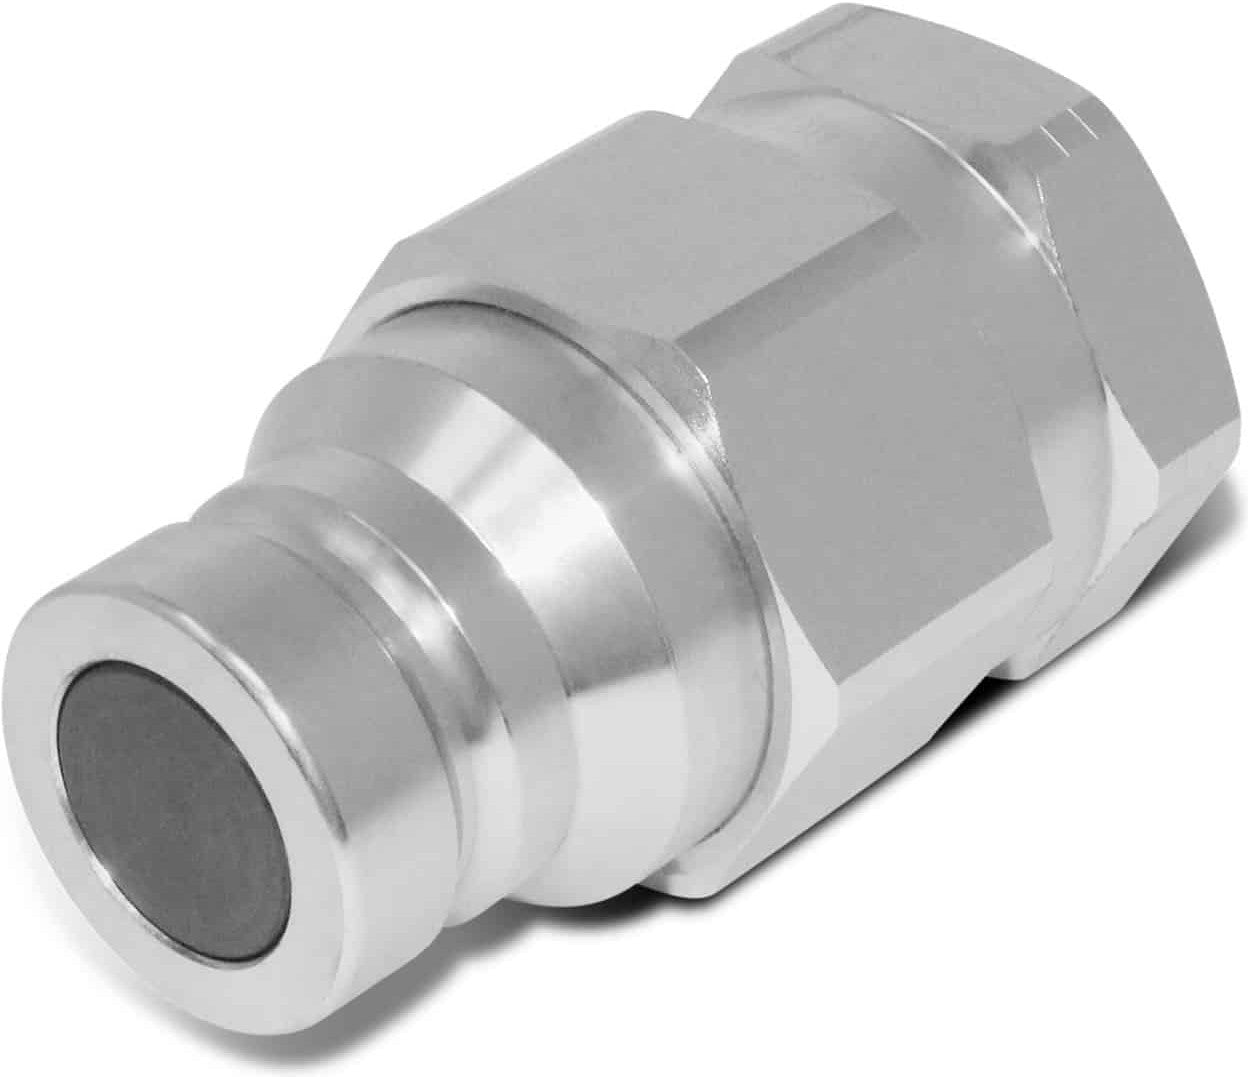 Johnny Vac - 1/4 Male Quike Coupler - 8902356